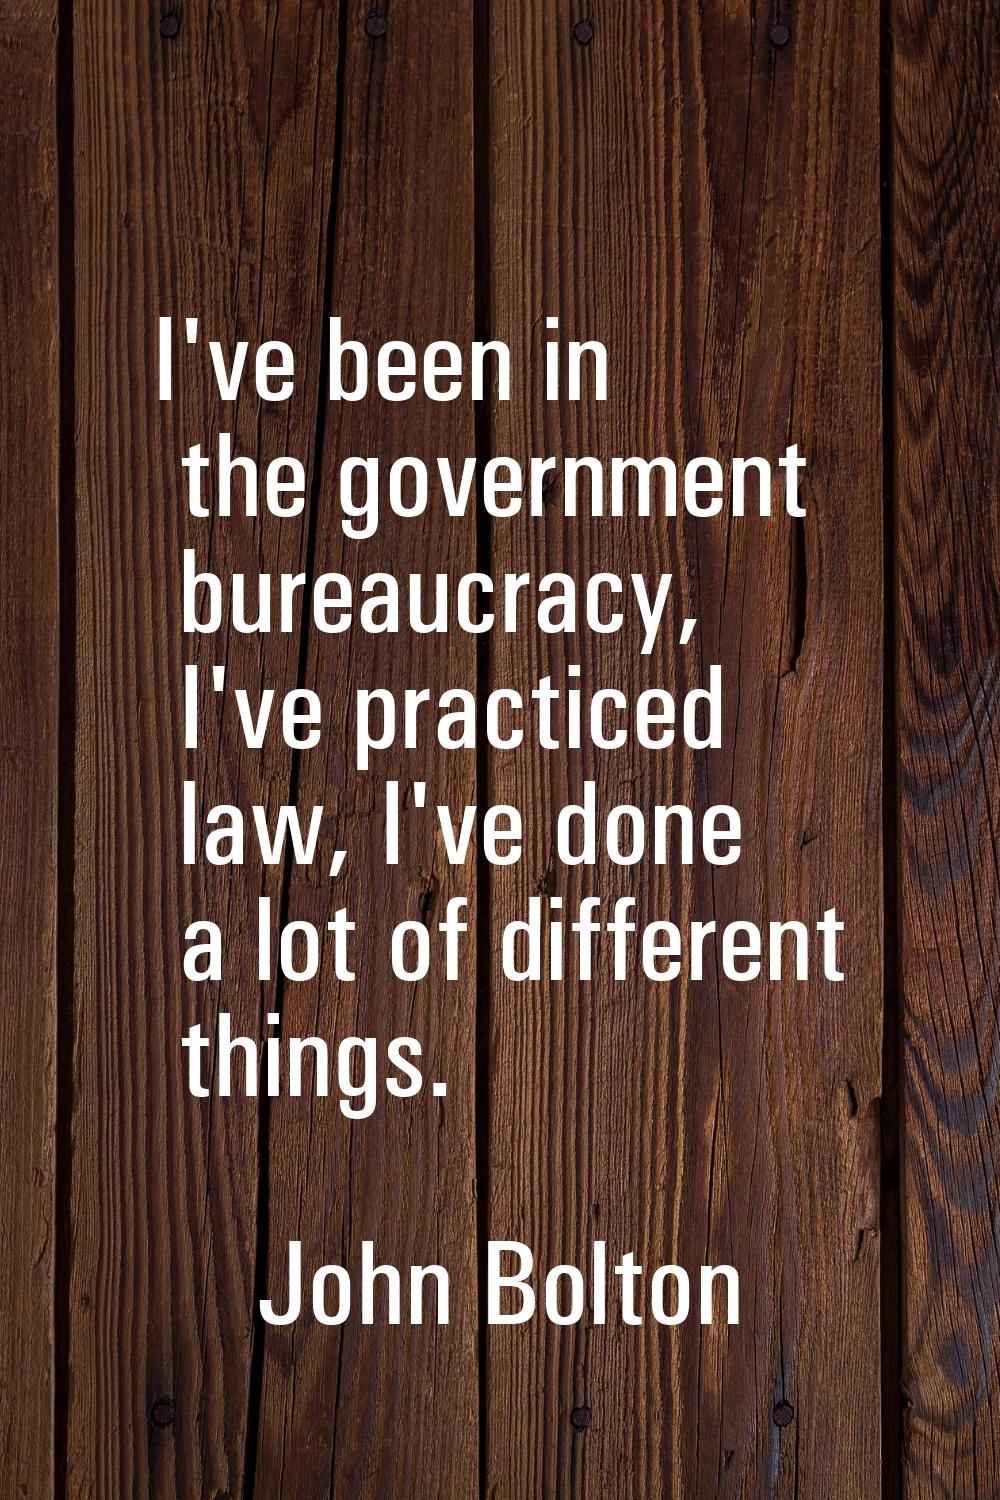 I've been in the government bureaucracy, I've practiced law, I've done a lot of different things.